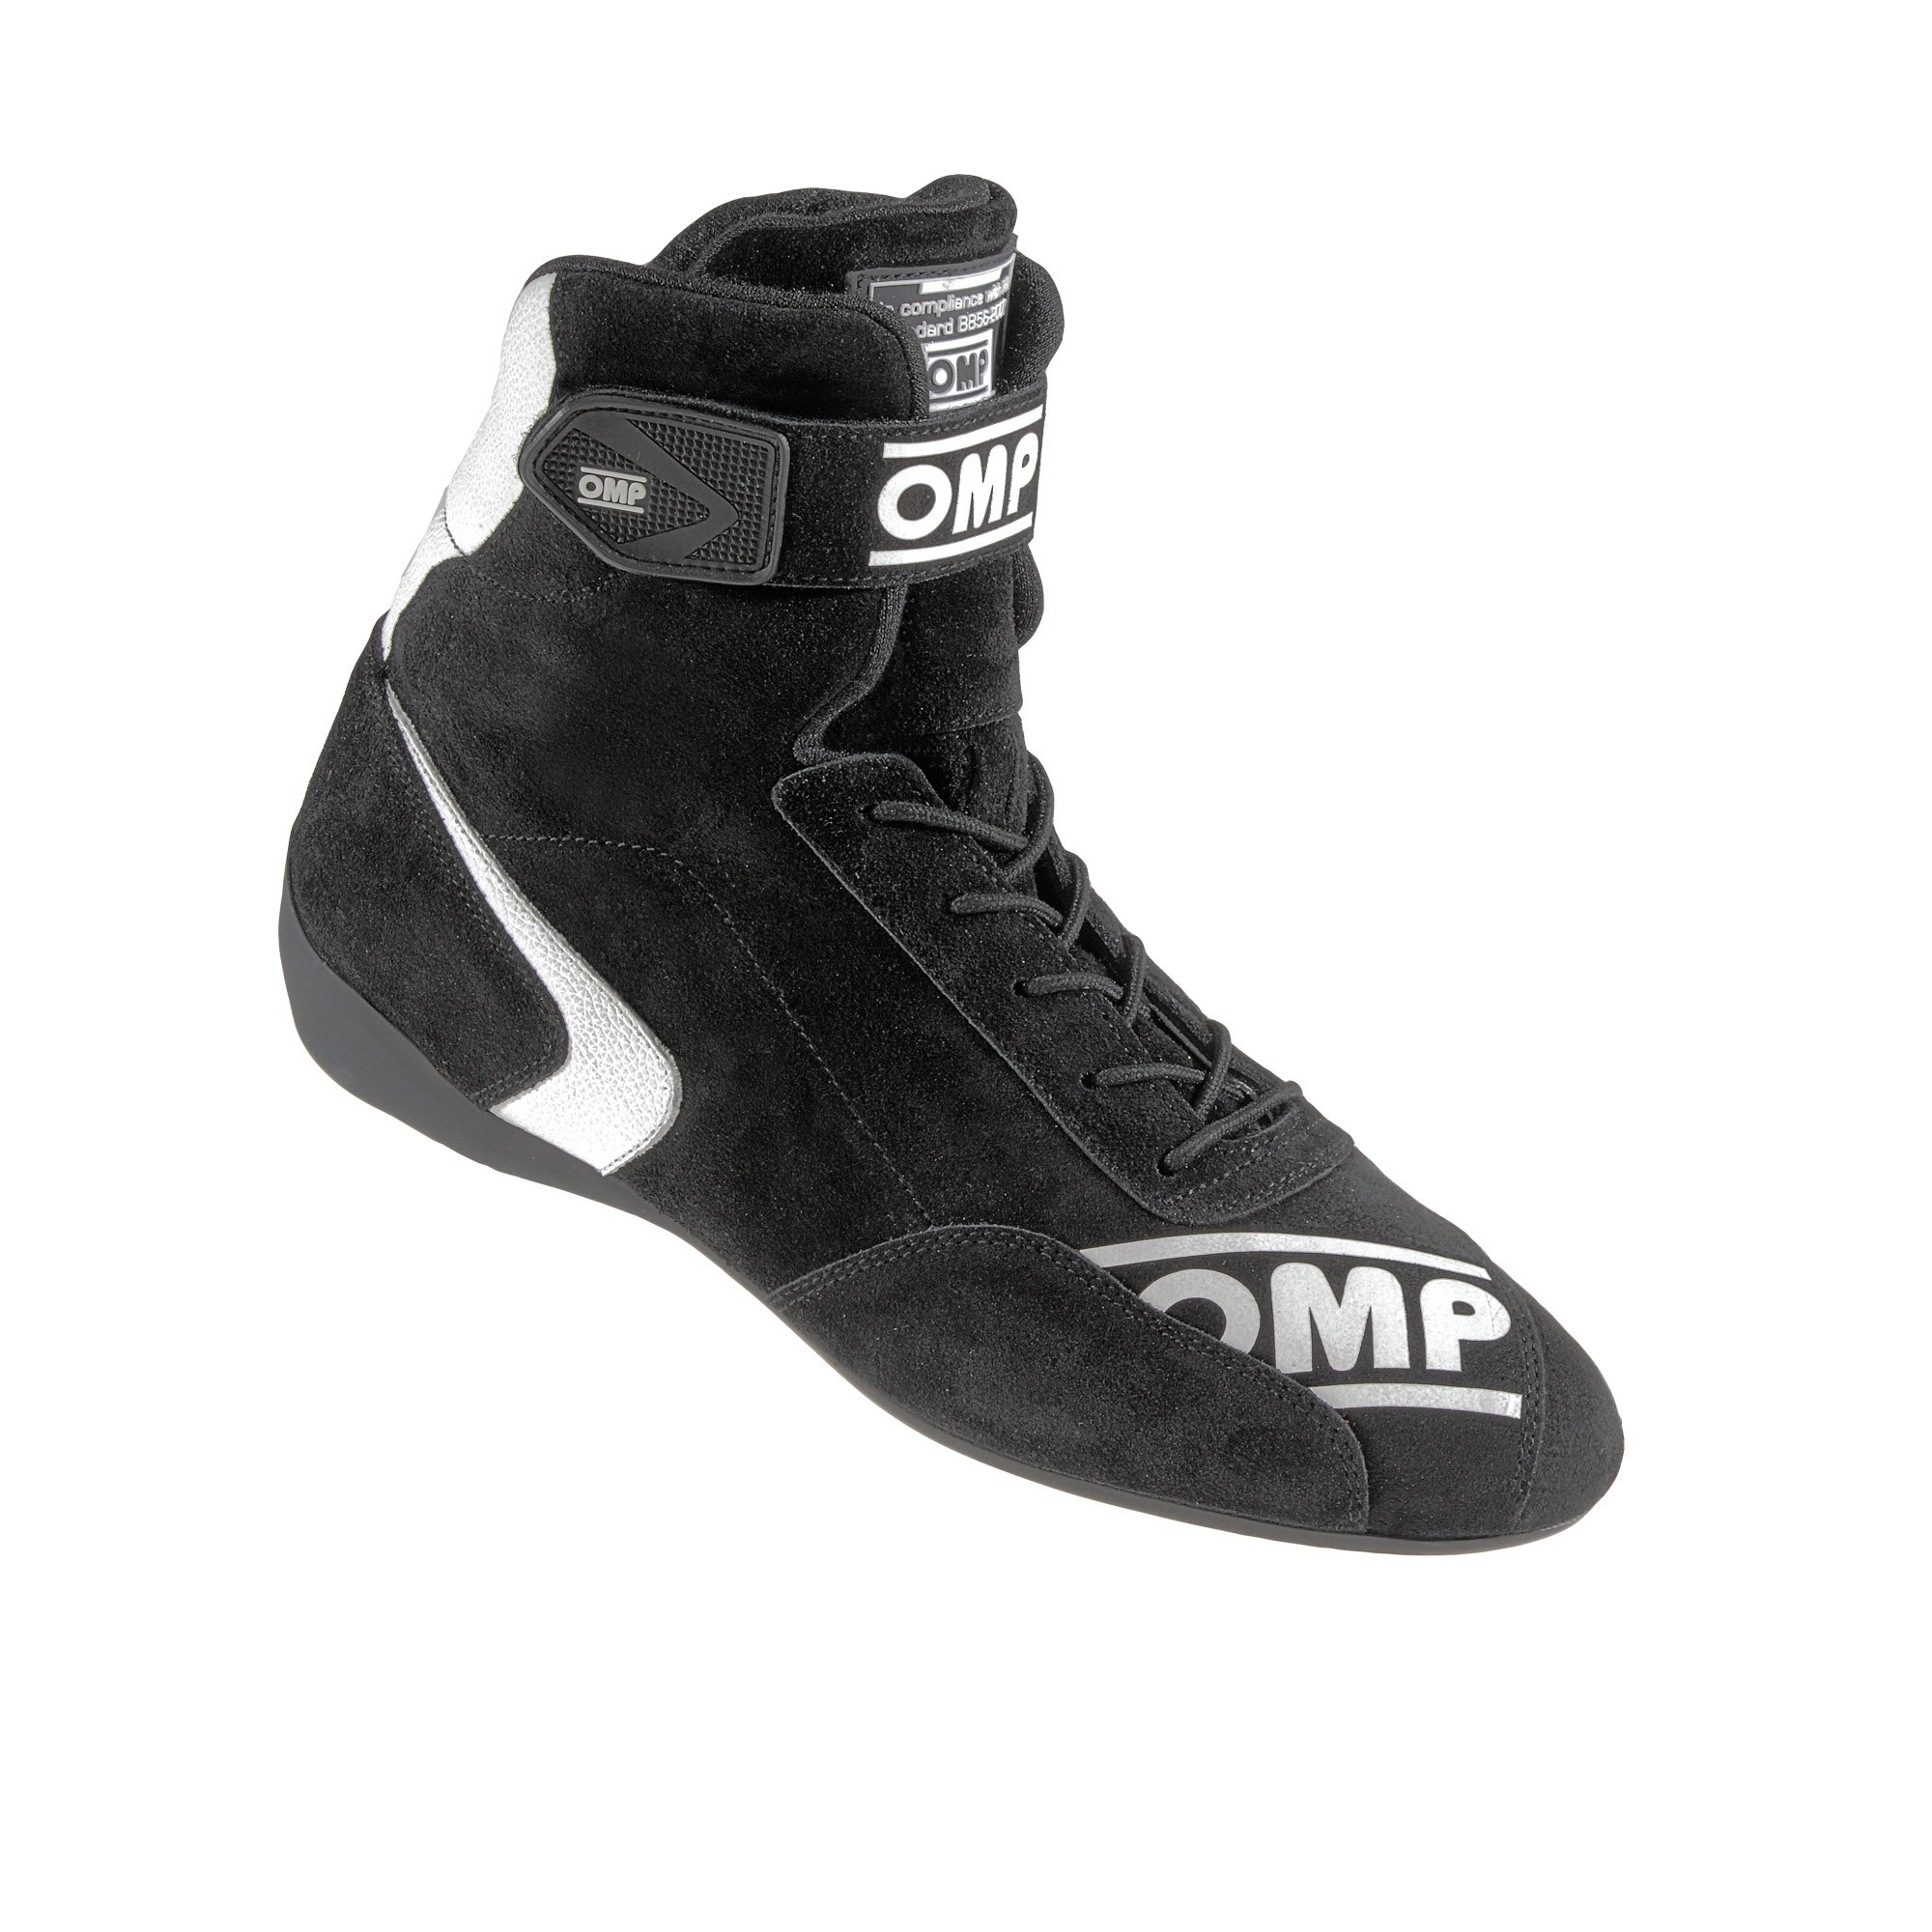 OMP FIRST HIGH SHOES